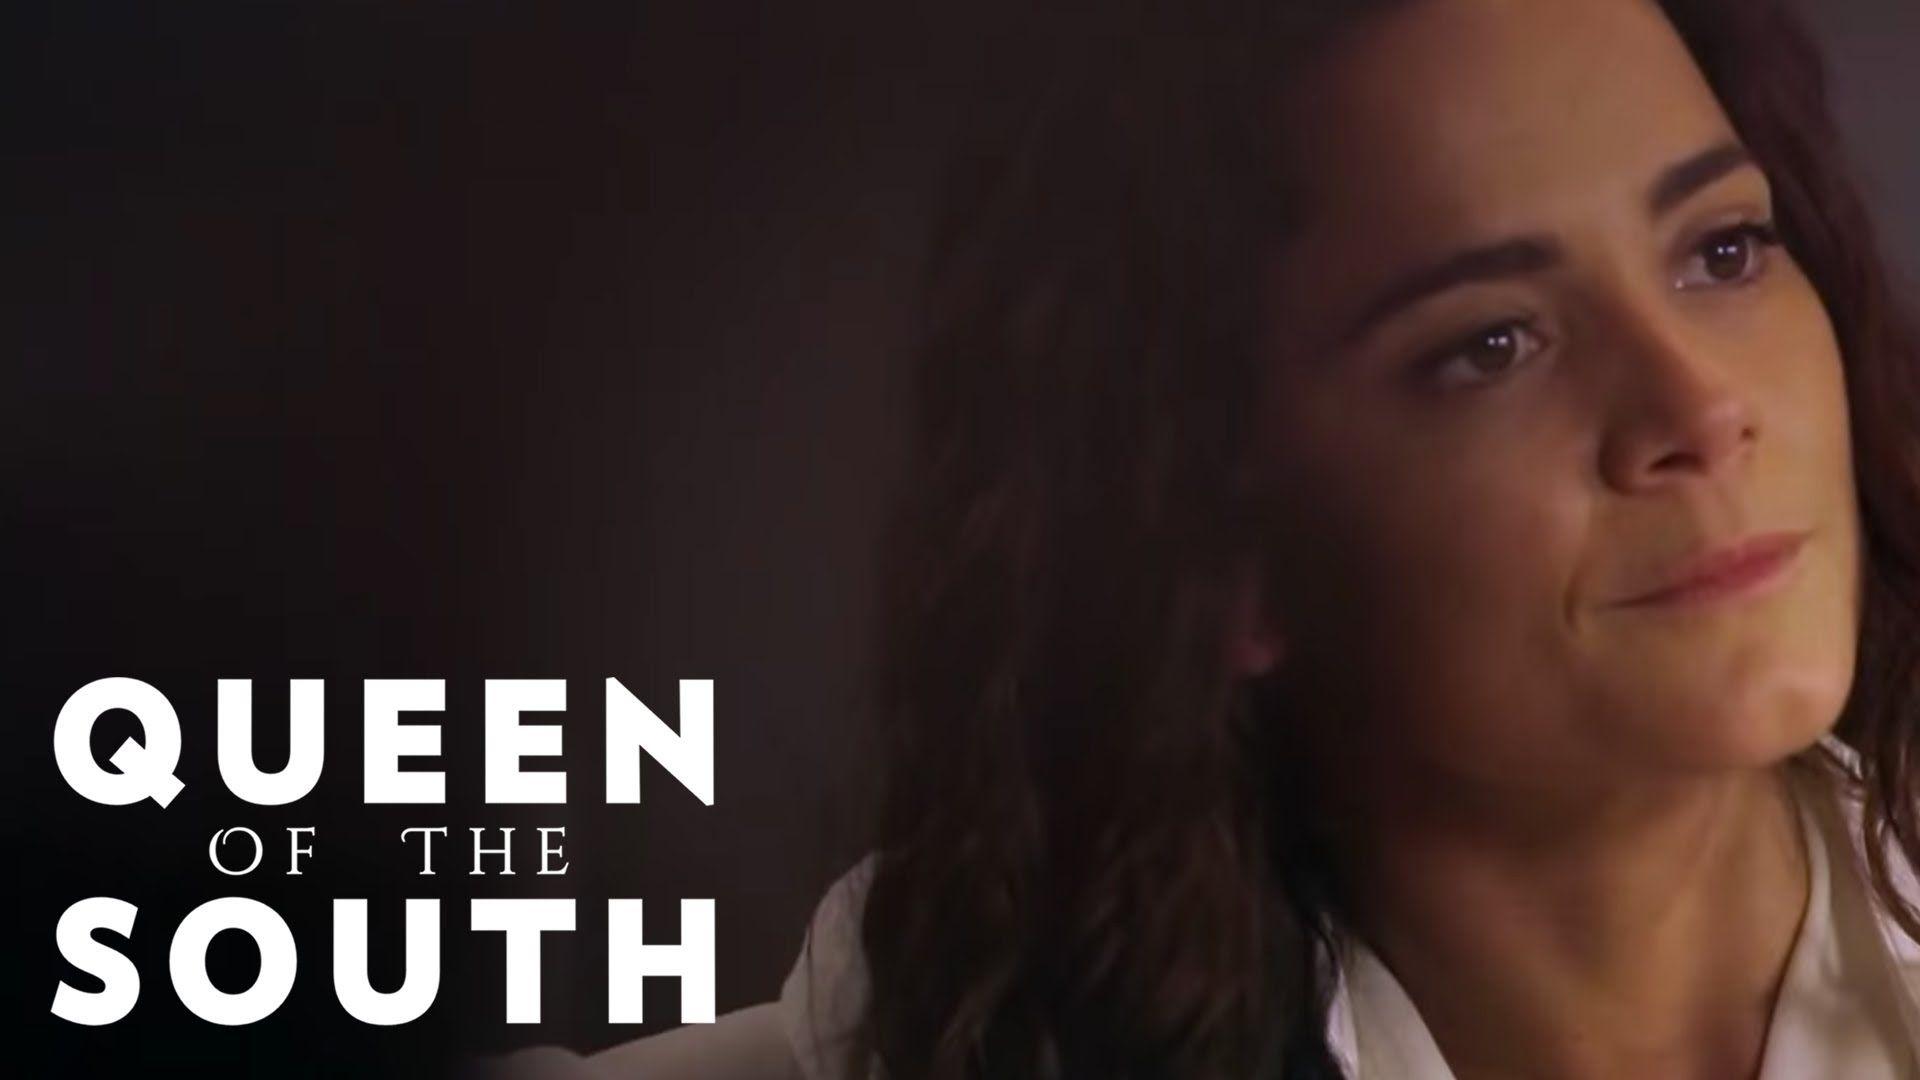 Queen of the South 1x2 Season 1 Episode 2. What We're